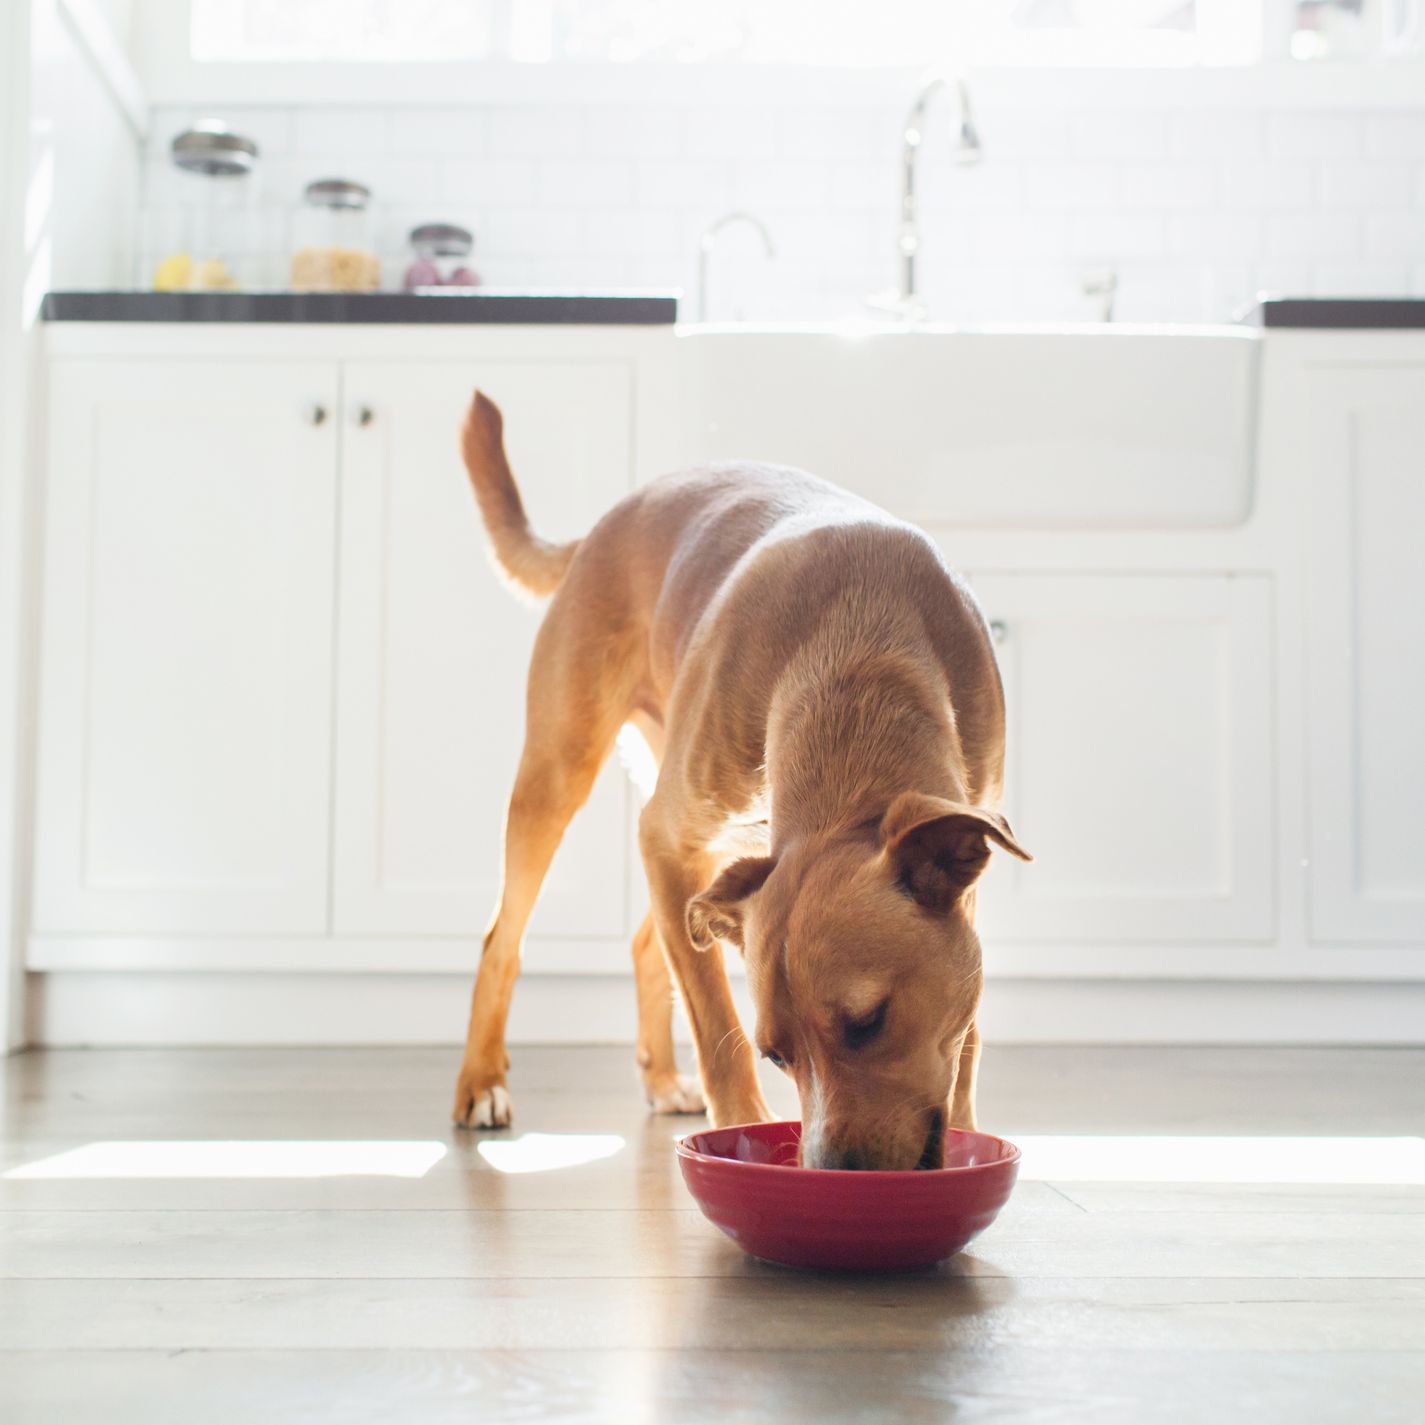 what causes dog salmonella